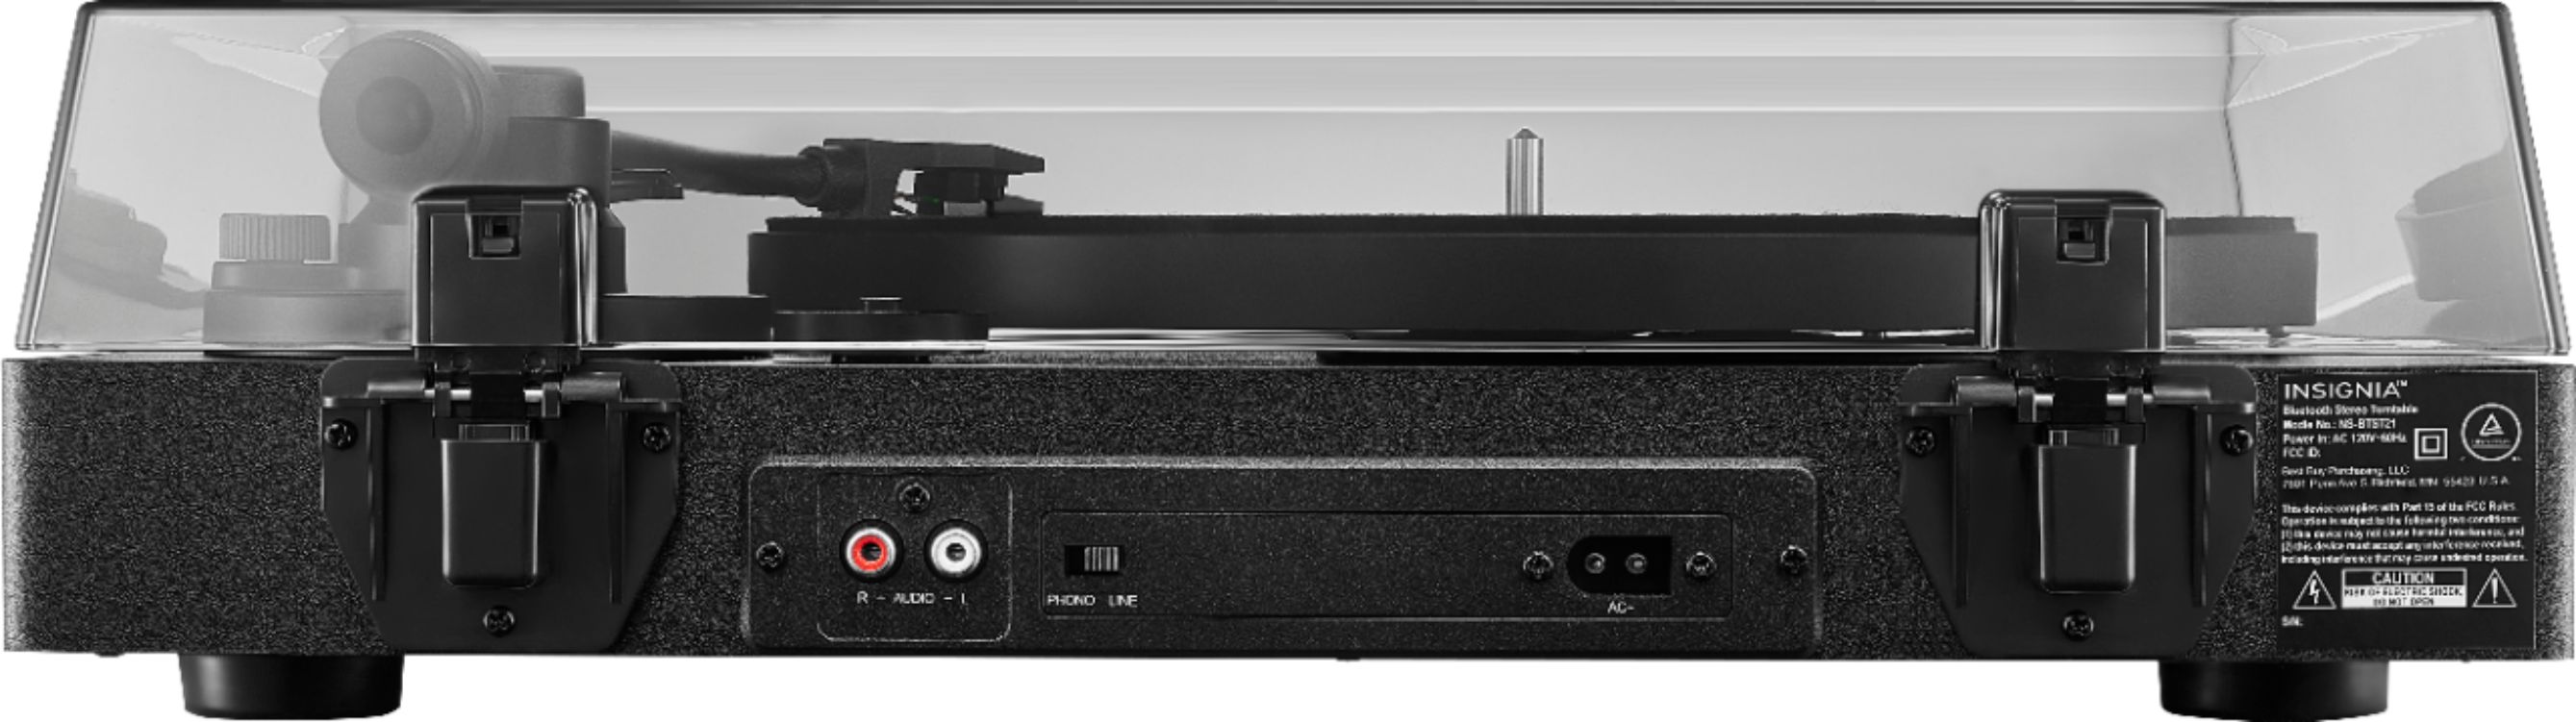 Insignia™ Bluetooth Stereo Turntable Black NS-BTST21 - Best Buy